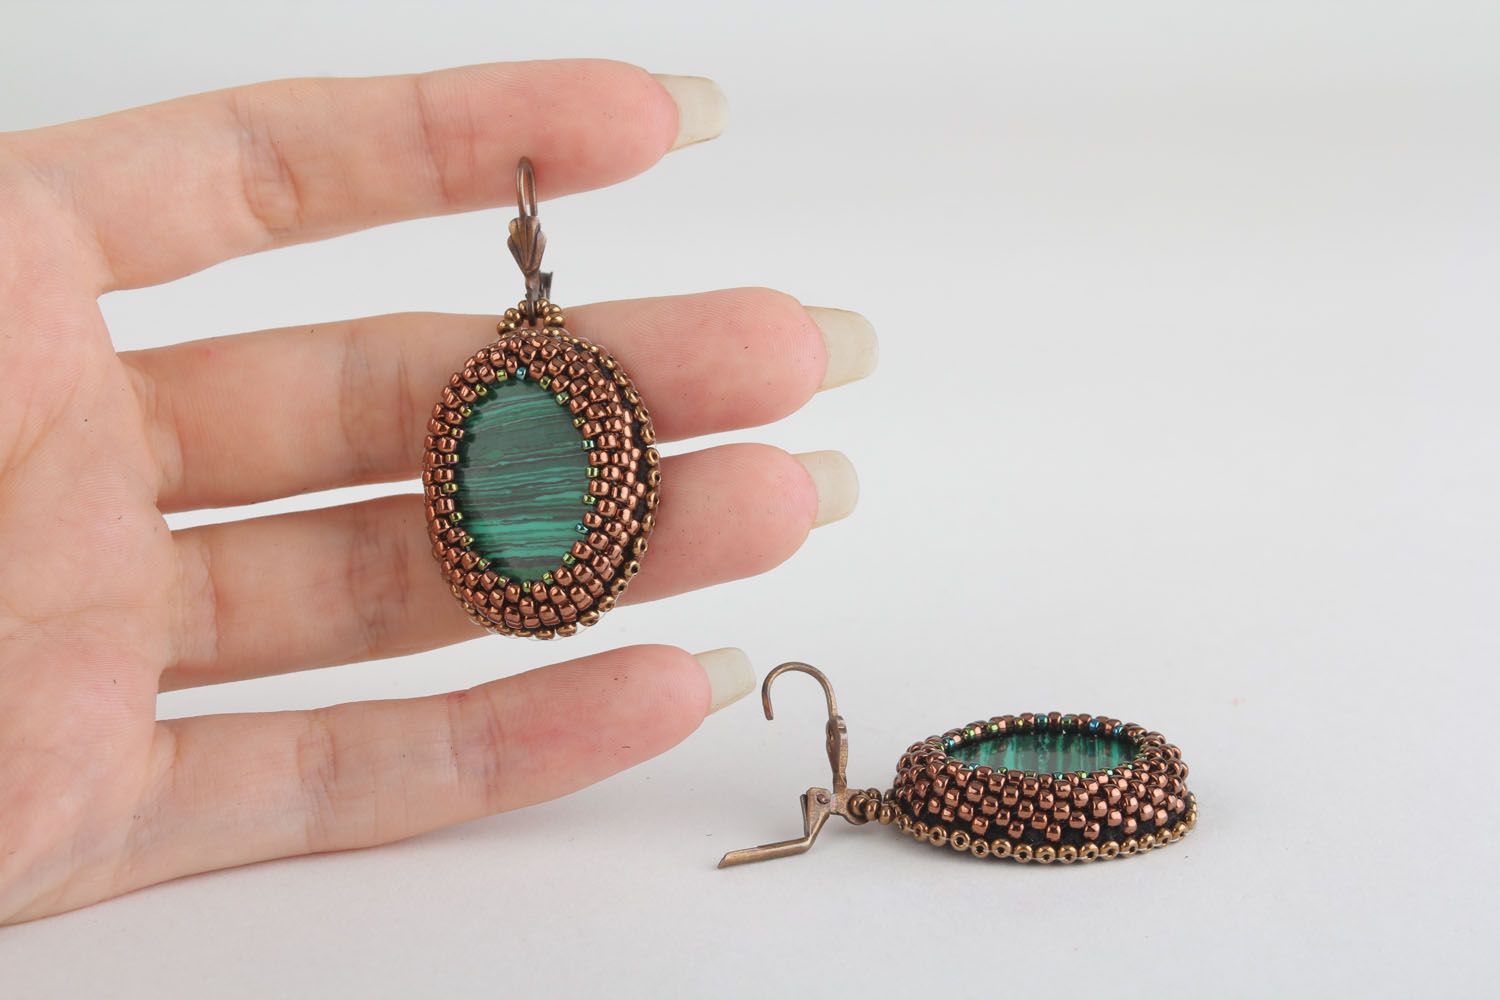 Earrings made of leather and malachite photo 4